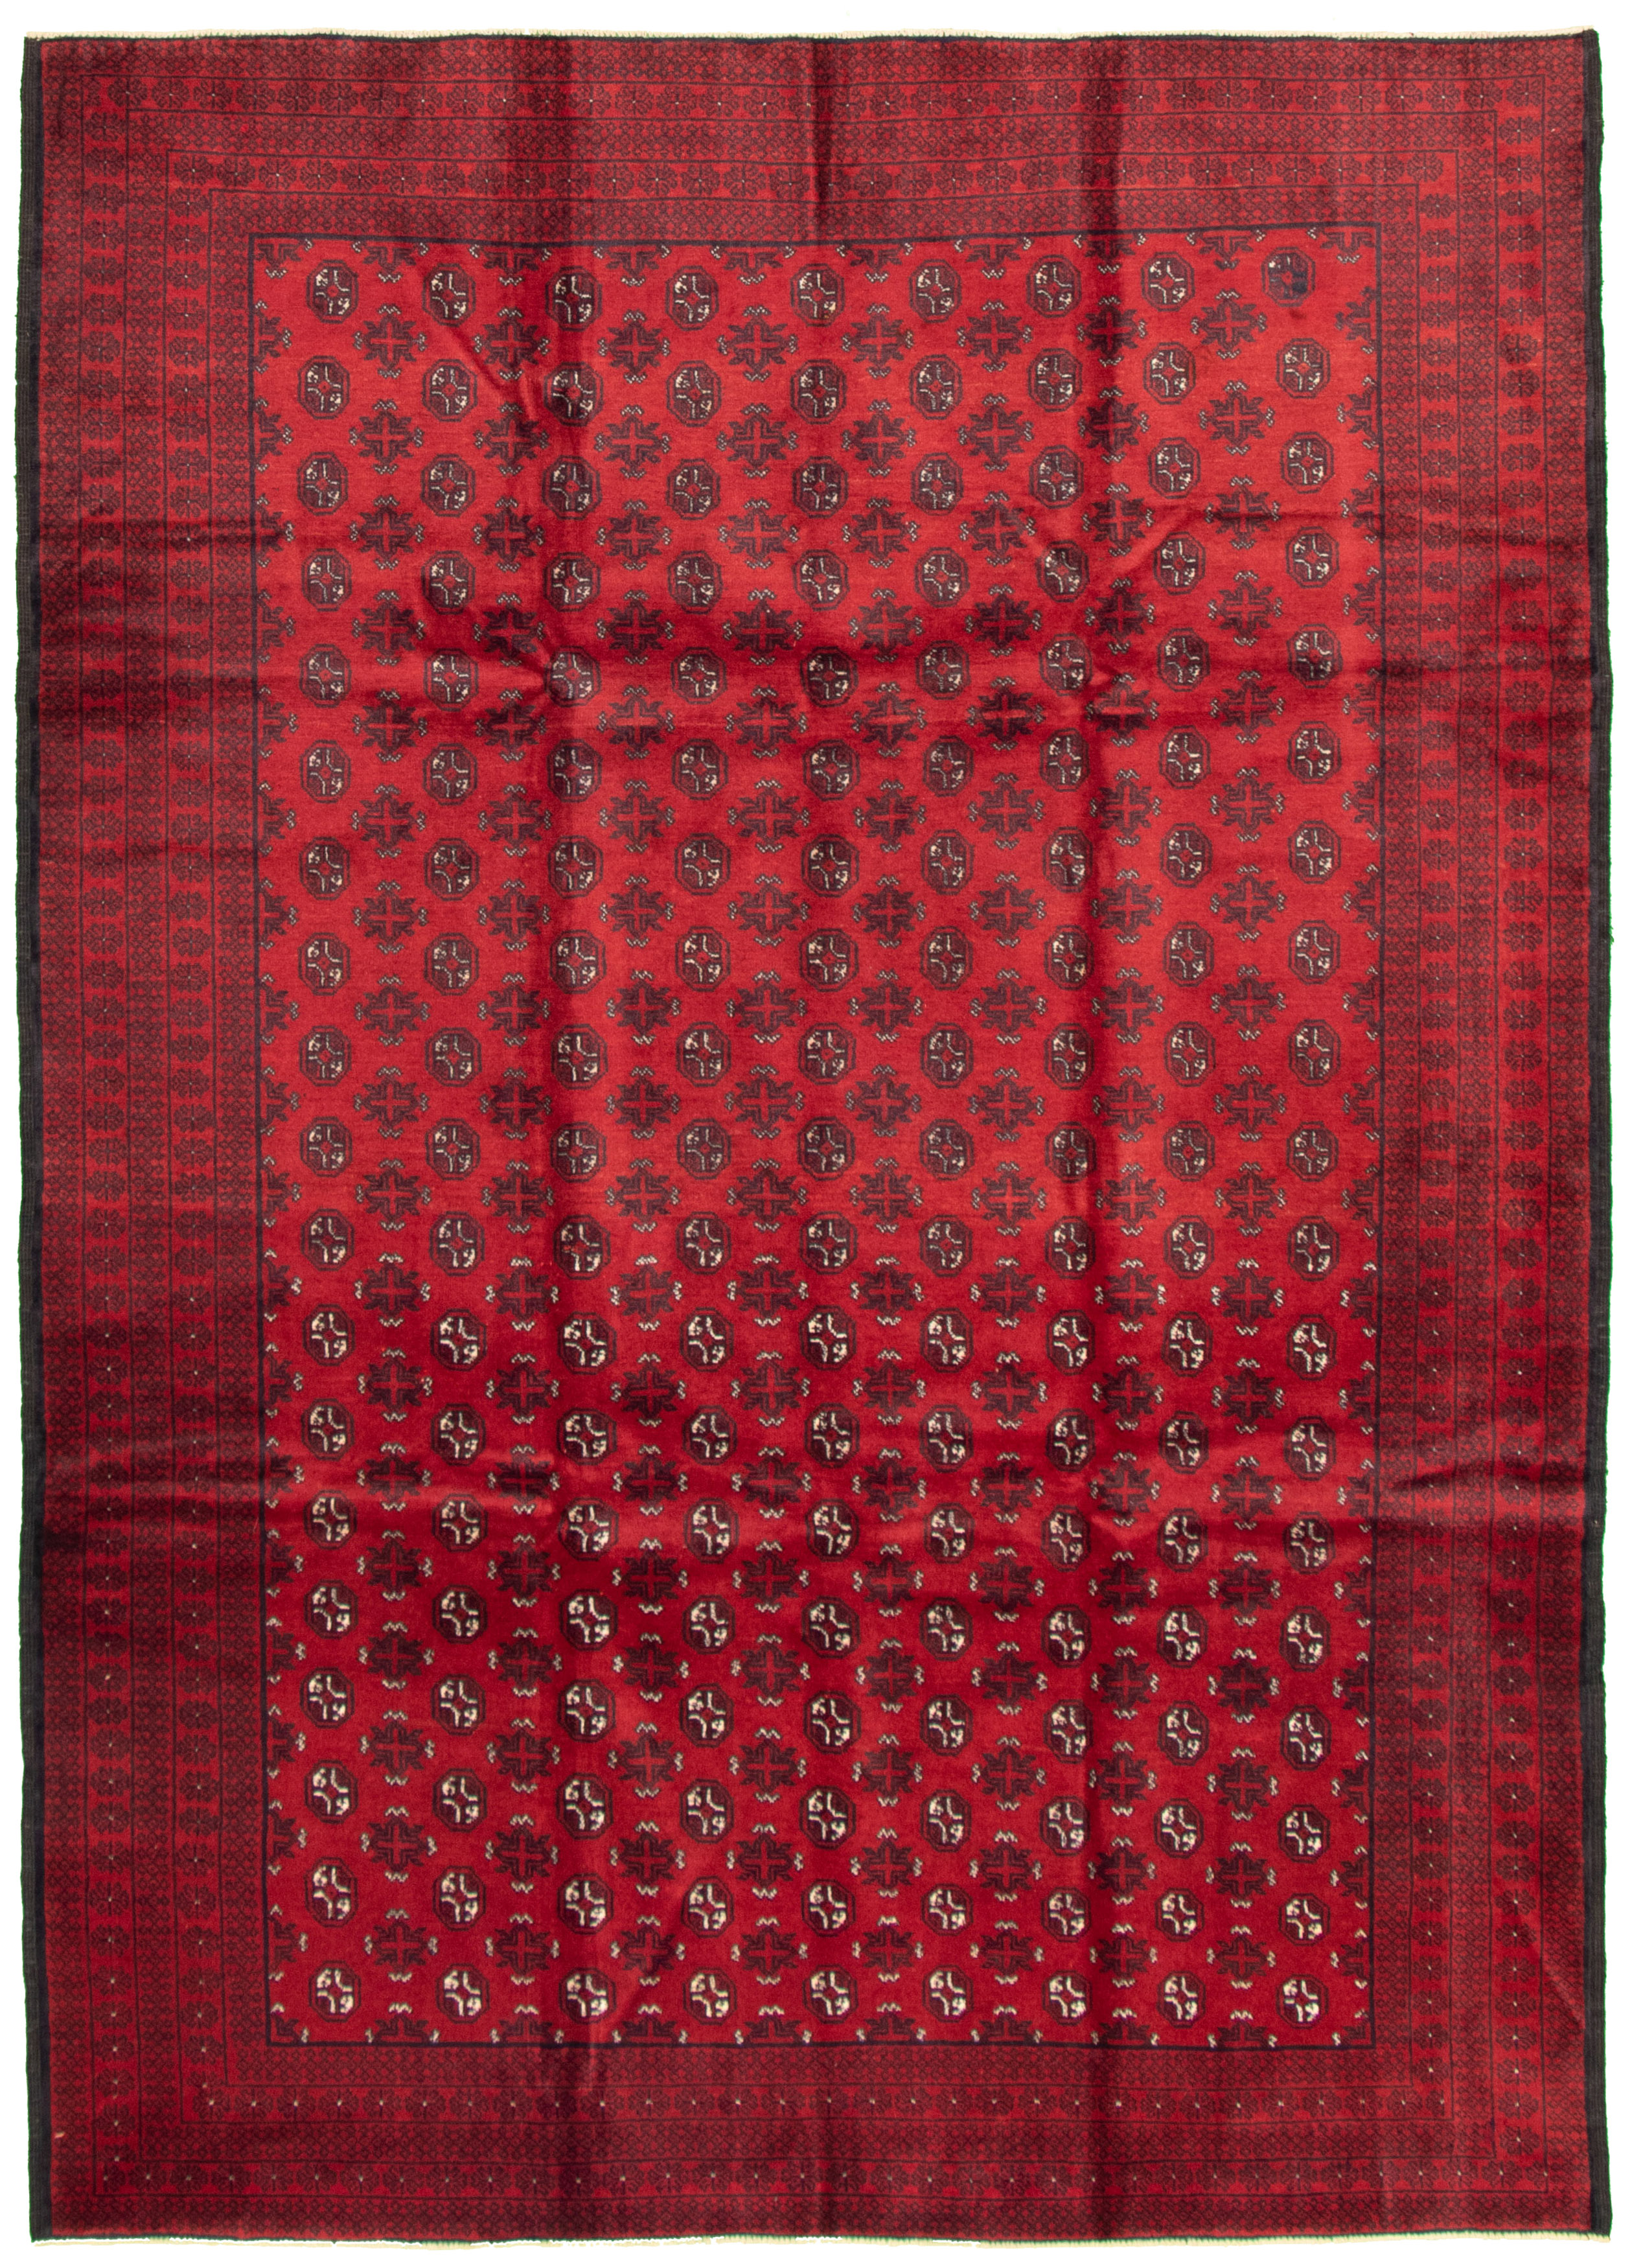 Hand-knotted Khal Mohammadi Red Wool Rug 6'7" x 9'7"  Size: 6'7" x 9'7"  